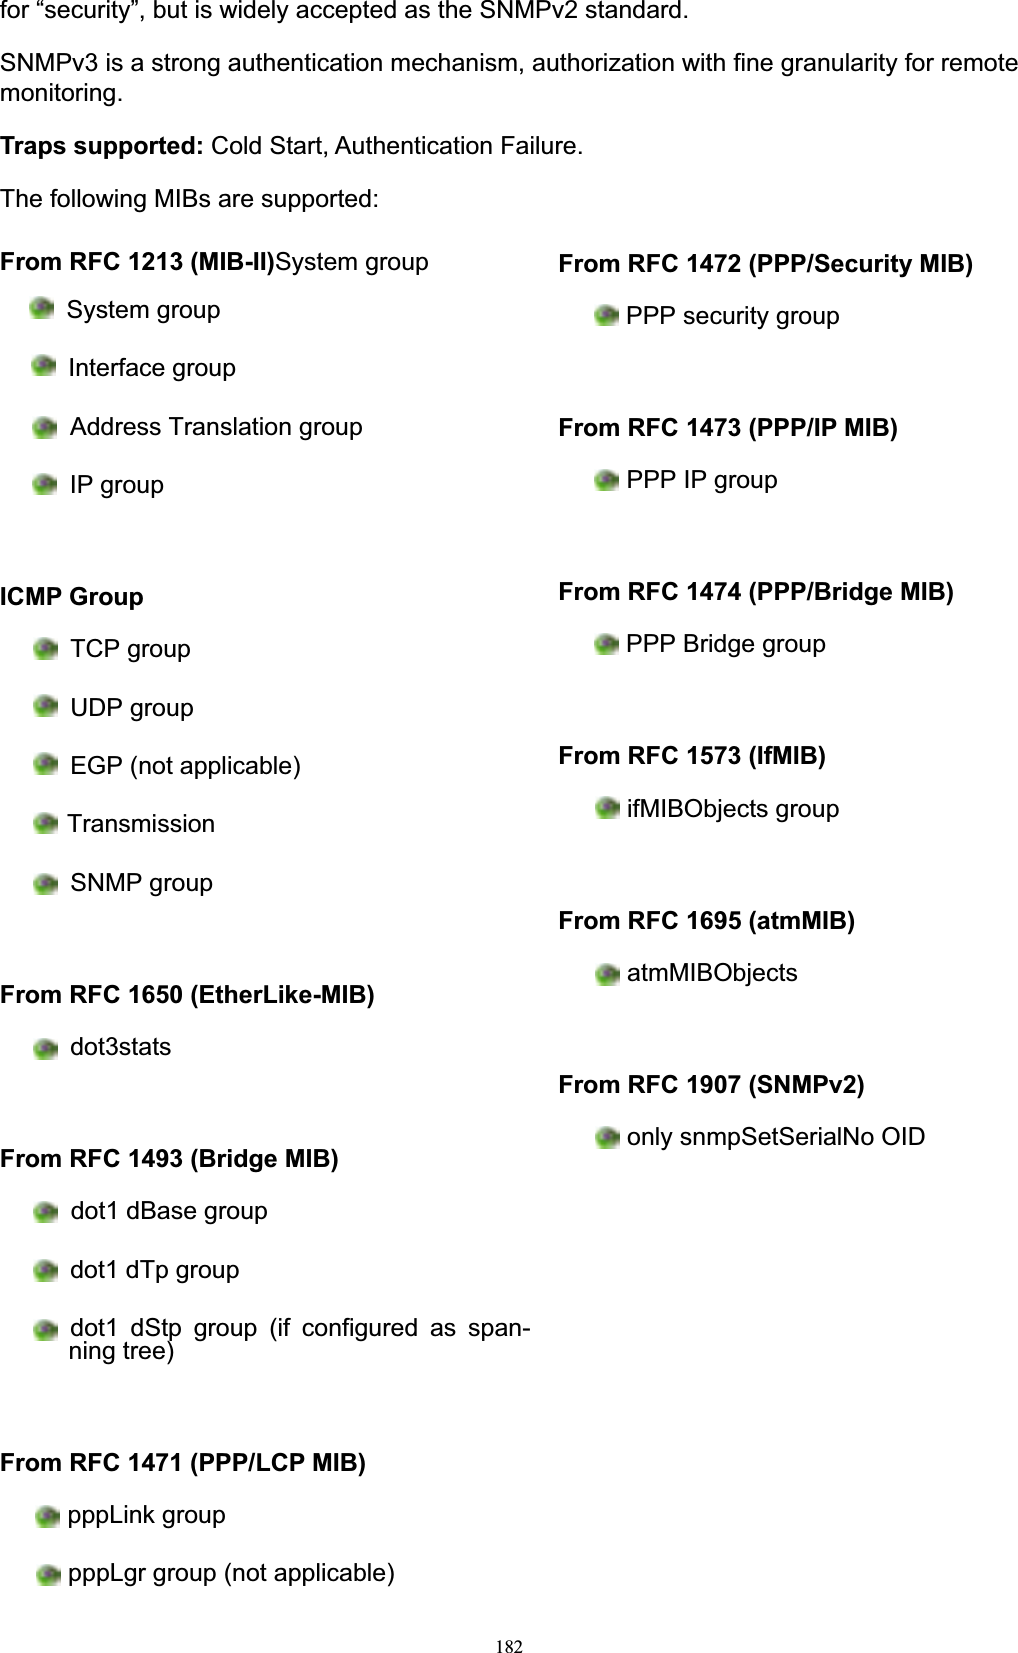 182for “security”, but is widely accepted as the SNMPv2 standard. SNMPv3 is a strong authentication mechanism, authorization with fine granularity for remote monitoring.Traps supported: Cold Start, Authentication Failure. The following MIBs are supported:From RFC 1213 (MIB-II)System group System group Interface group Address Translation group IP groupICMP GroupTCP groupUDP group EGP (not applicable) TransmissionSNMP group From RFC 1650 (EtherLike-MIB)dot3statsFrom RFC 1493 (Bridge MIB)dot1 dBase group dot1 dTp group dot1 dStp group (if configured as span- ning tree) From RFC 1471 (PPP/LCP MIB)pppLink group pppLgr group (not applicable) From RFC 1472 (PPP/Security MIB)PPP security groupFrom RFC 1473 (PPP/IP MIB)PPP IP groupFrom RFC 1474 (PPP/Bridge MIB)PPP Bridge groupFrom RFC 1573 (IfMIB)ifMIBObjects groupFrom RFC 1695 (atmMIB)atmMIBObjectsFrom RFC 1907 (SNMPv2)only snmpSetSerialNo OID 